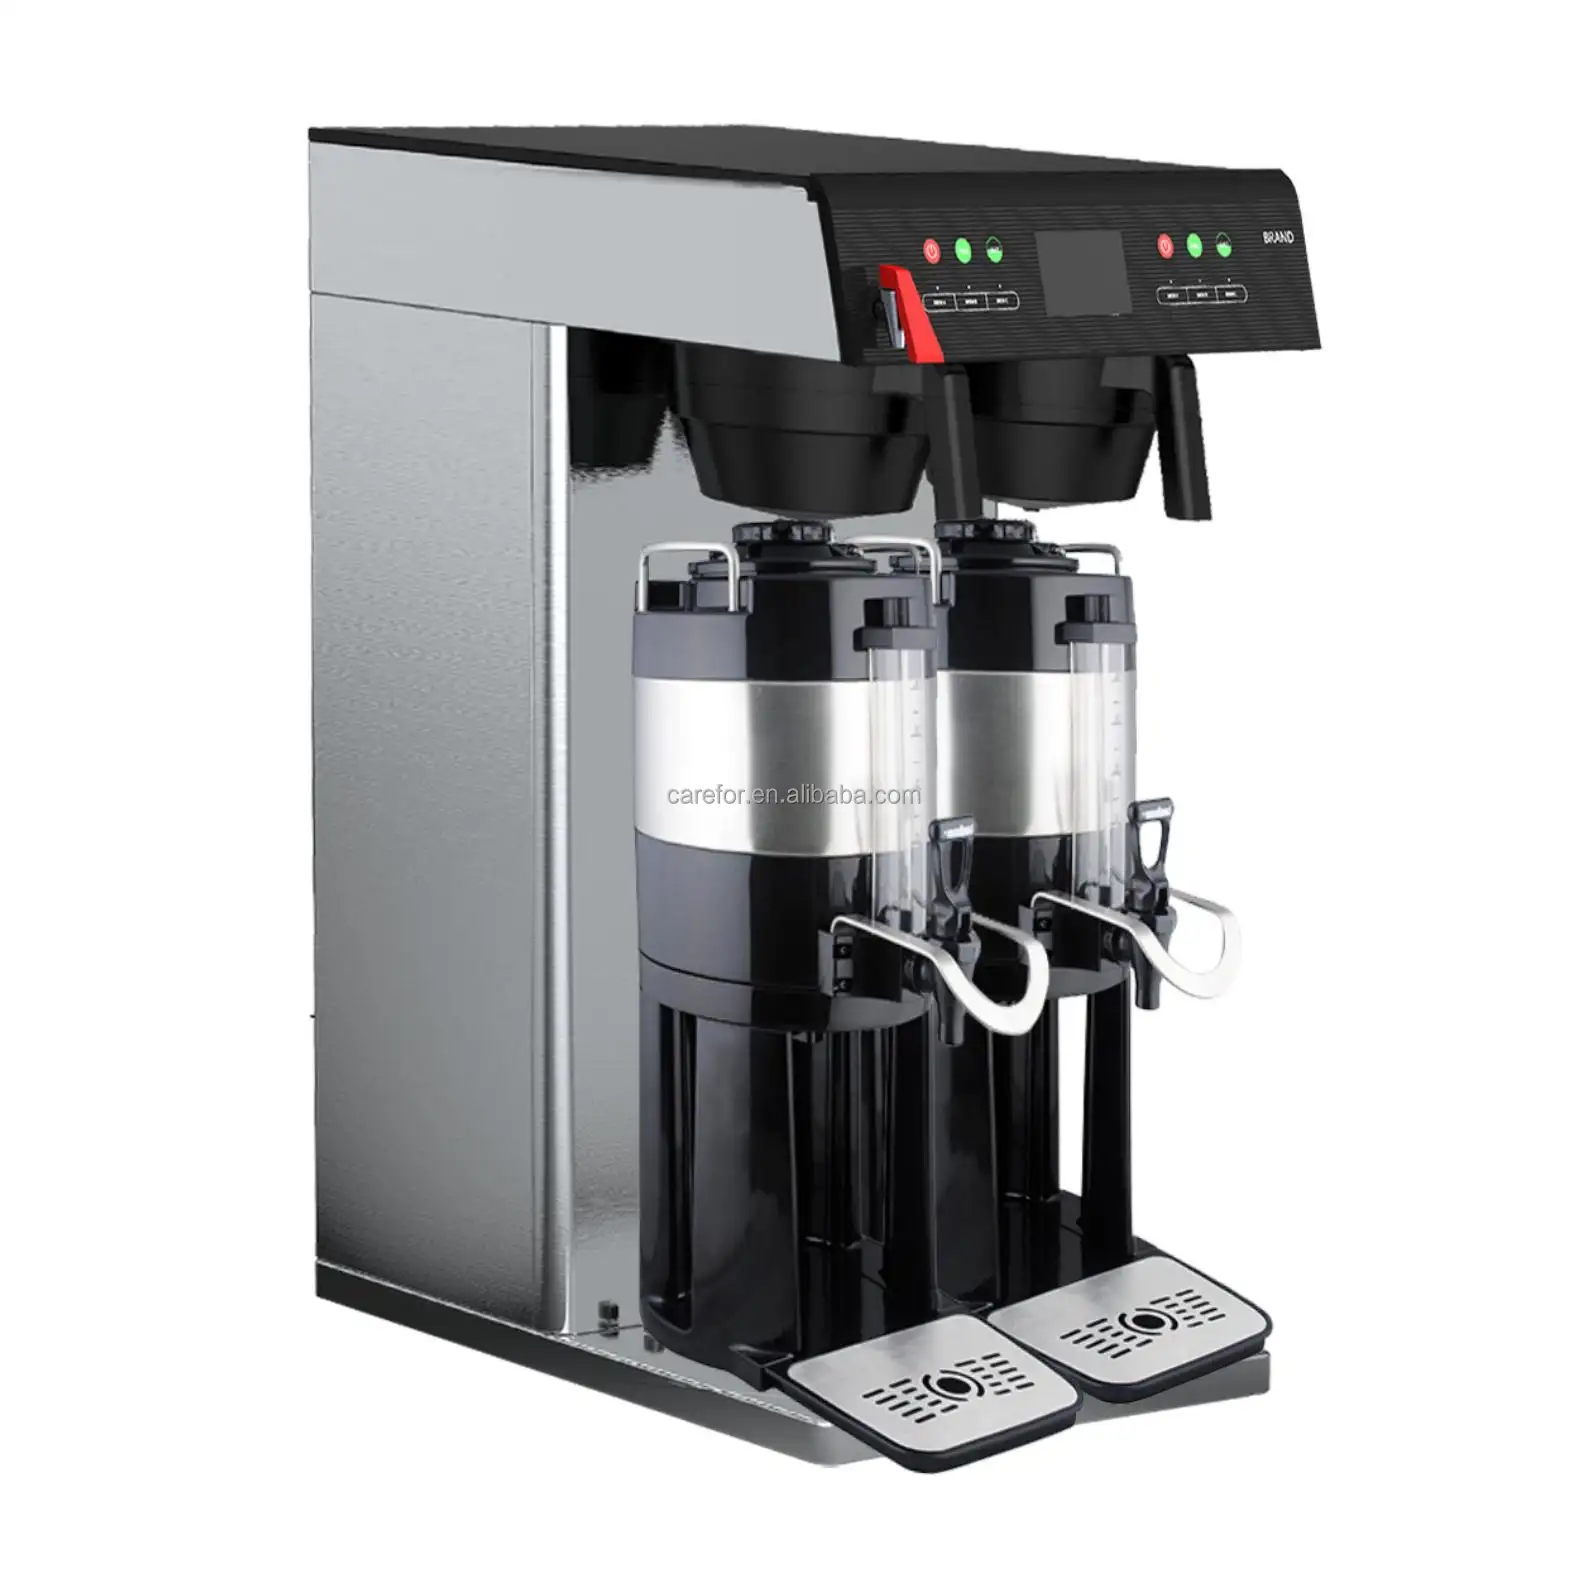 Americano Coffee Machine Automatic Electric Automatically Grind-And-Brew Coffee Maker Drip Coffee Maker